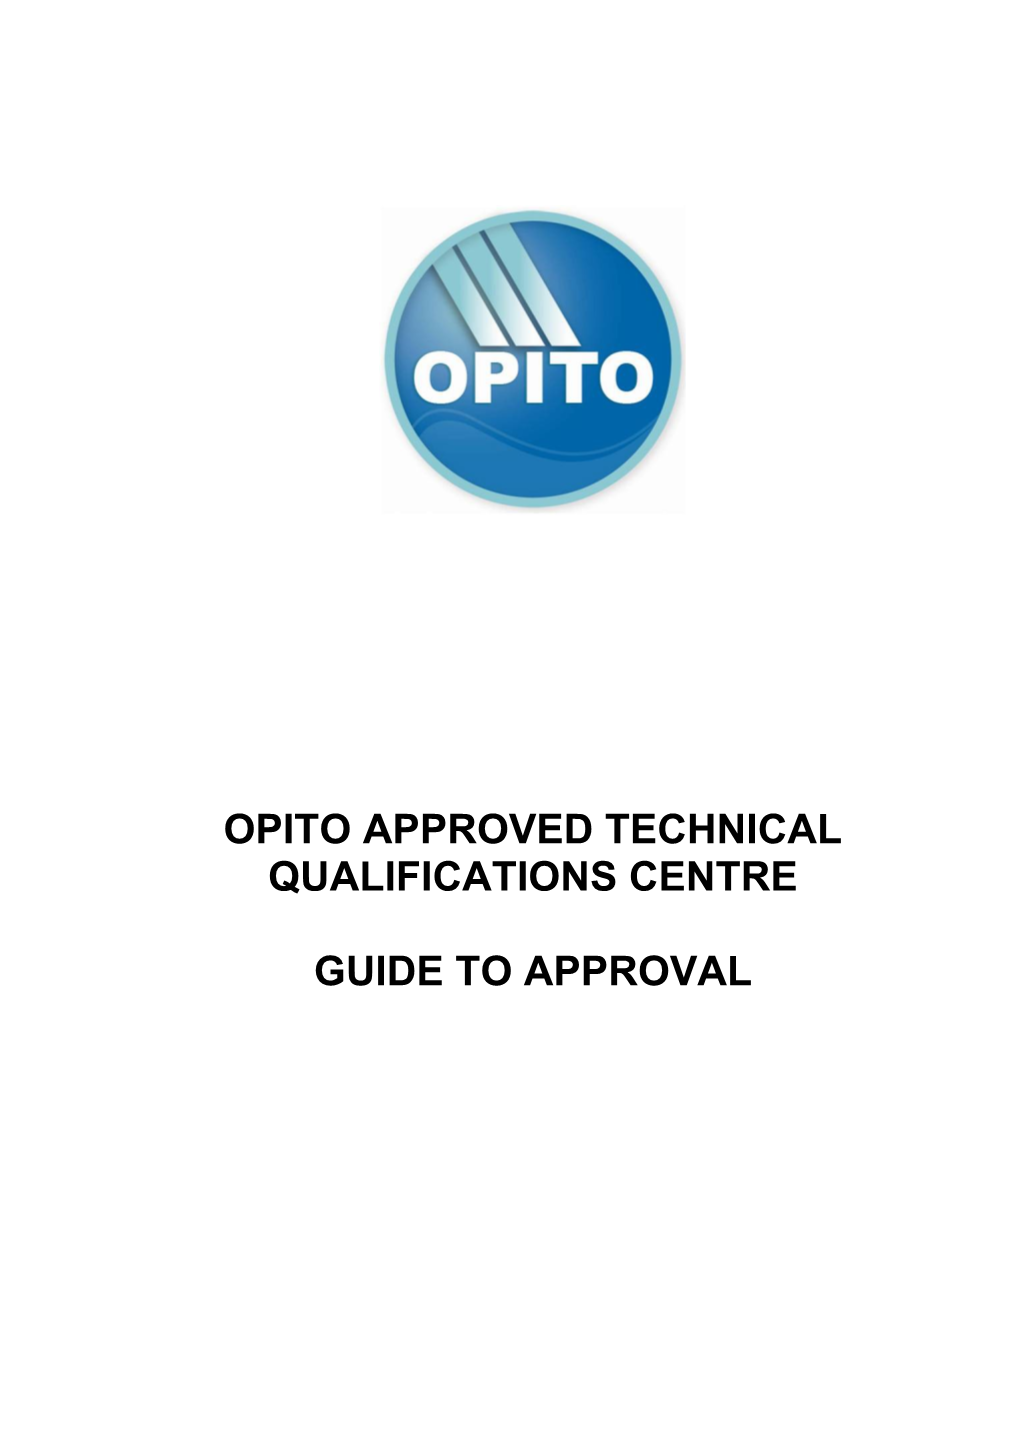 Opito Approved Technical Qualifications Centre